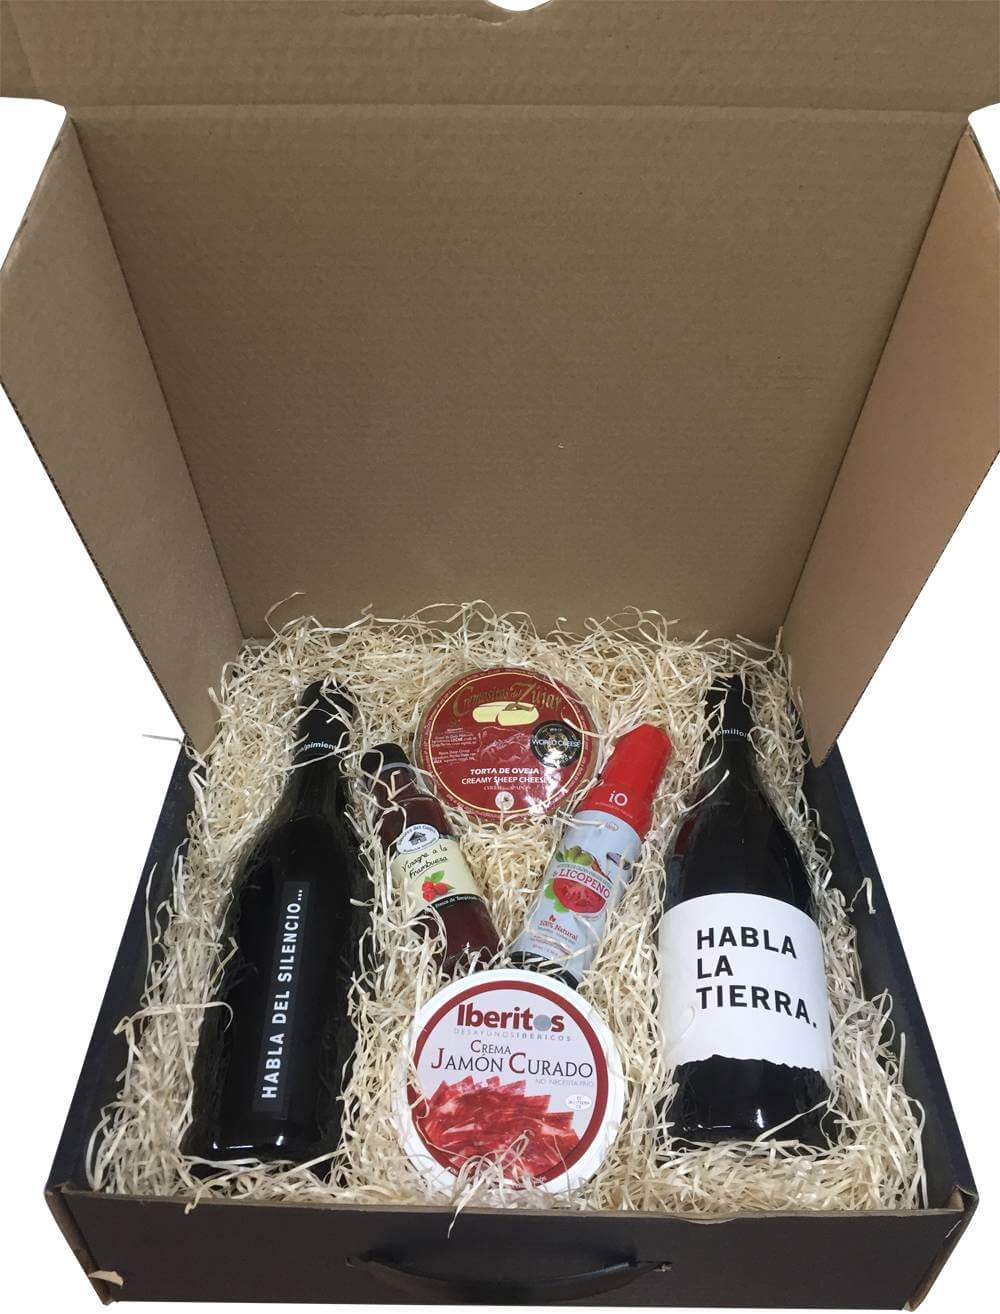 Large Gift Box with Speech, Cremosito, Vinegar, Oil and Cream Ham for Business